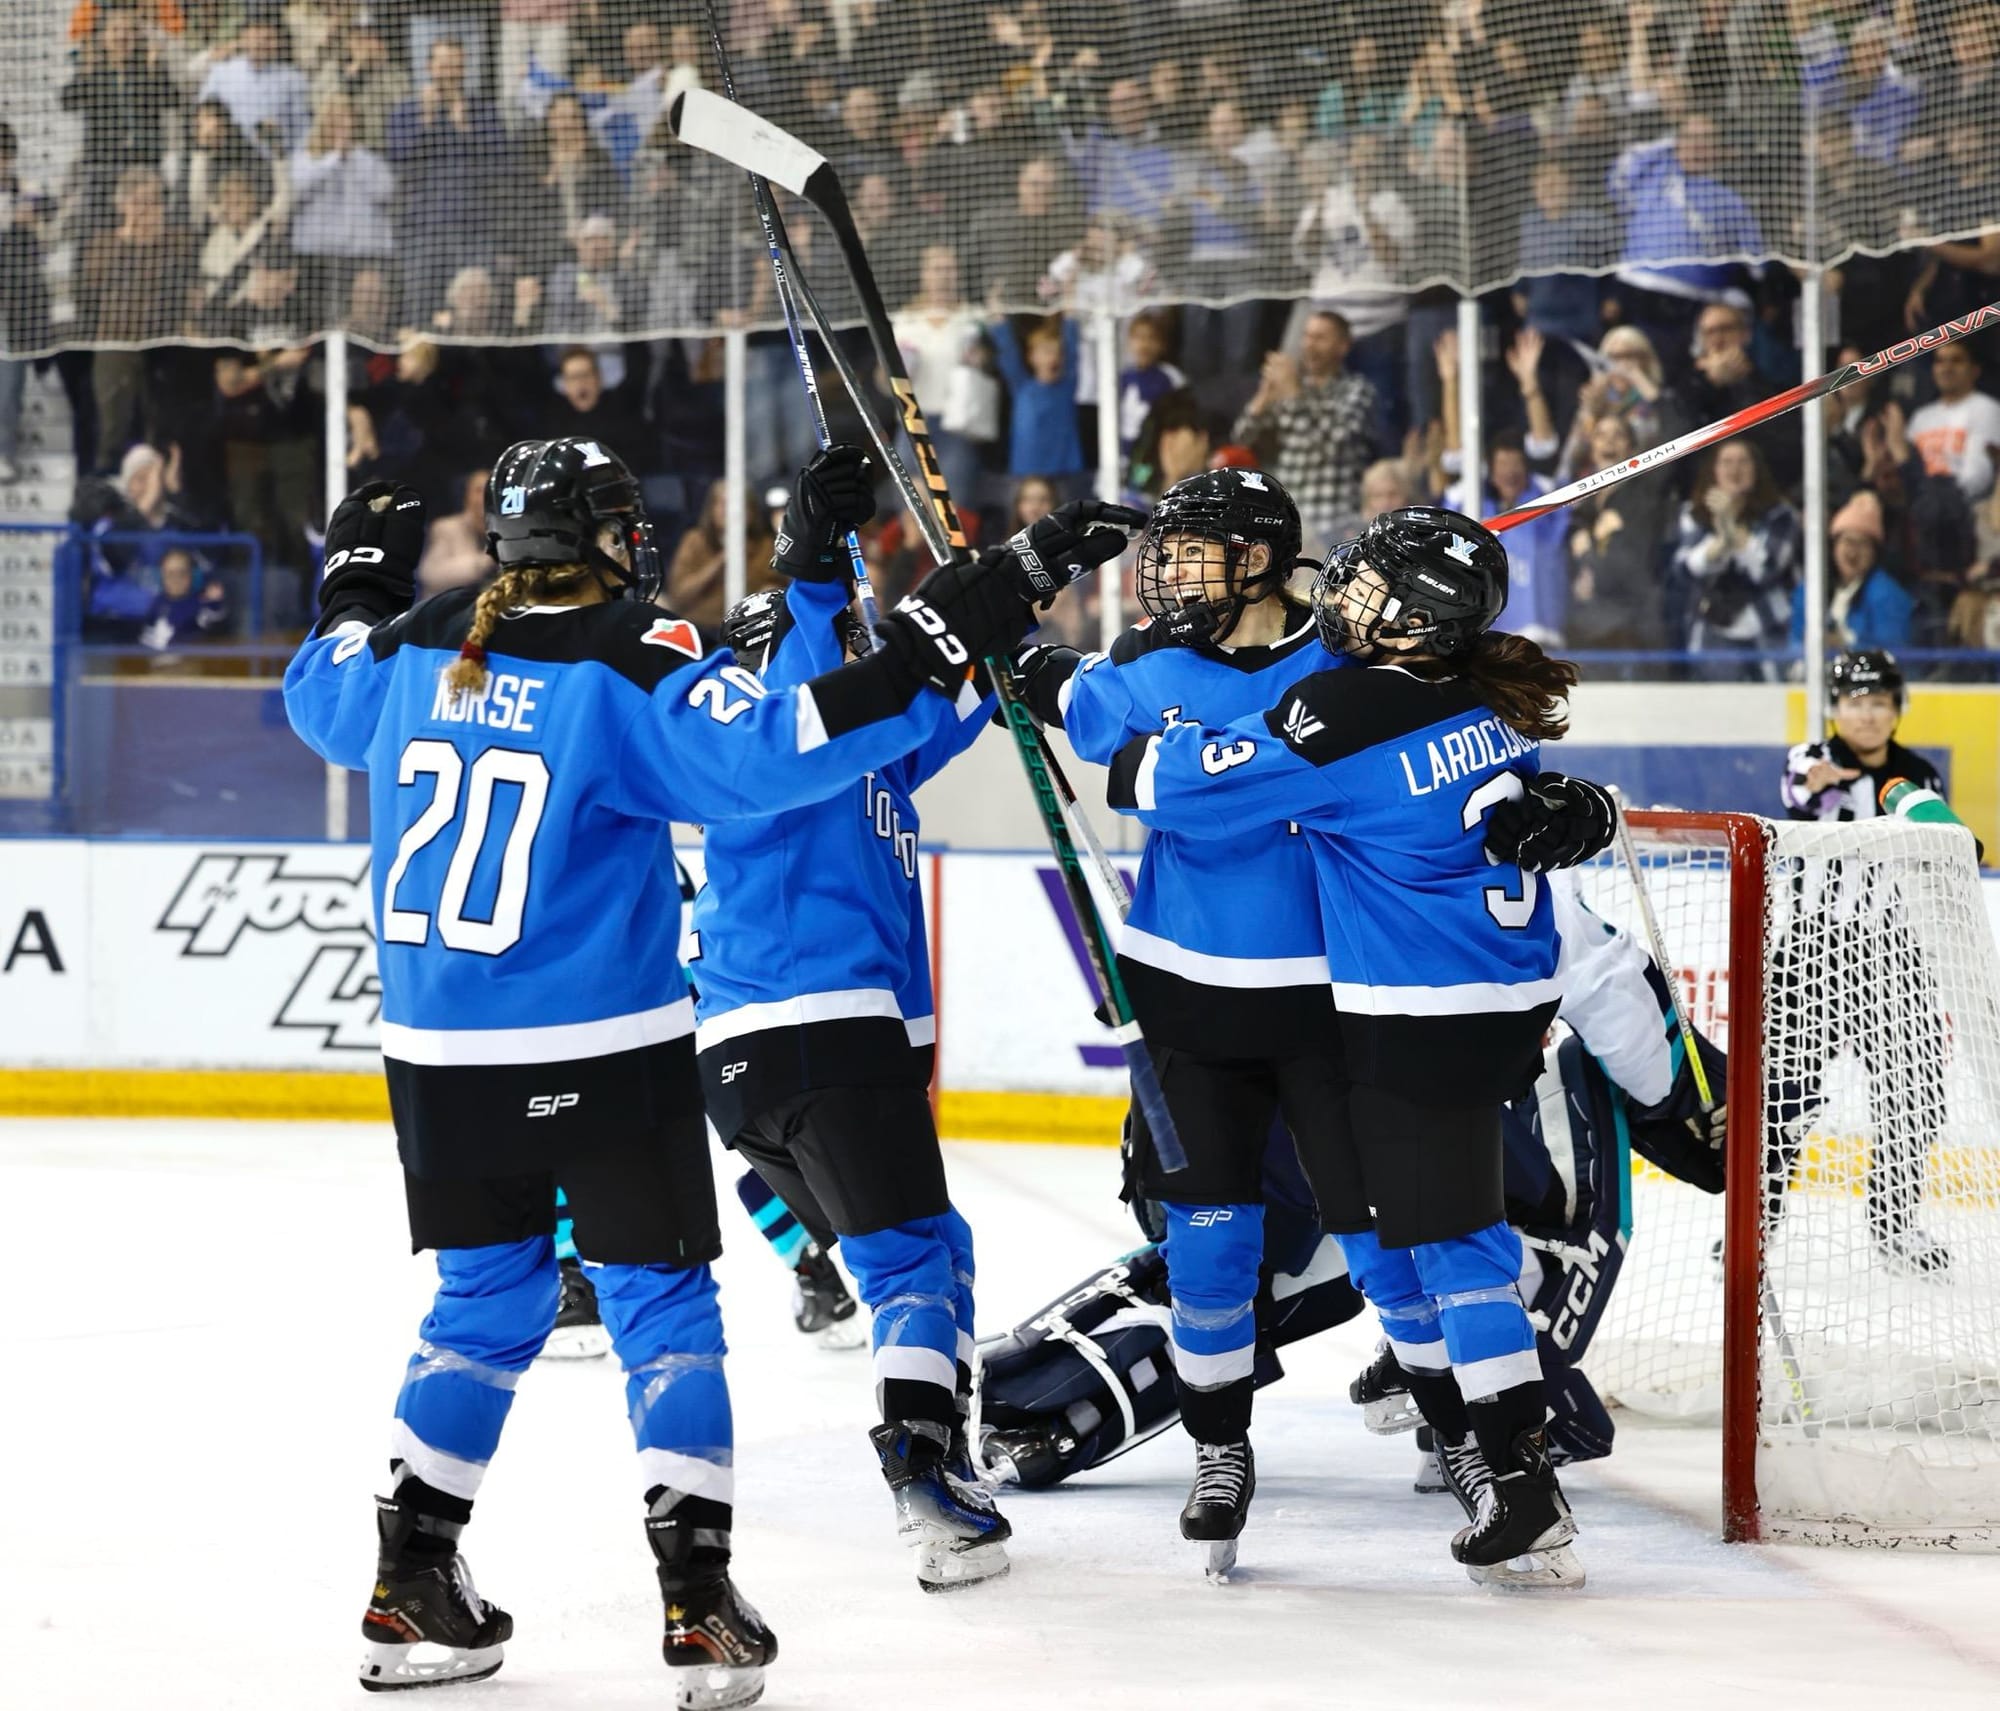 Natalie Spooner celebrates her goal with her teammates, all wearing blue home uniforms.